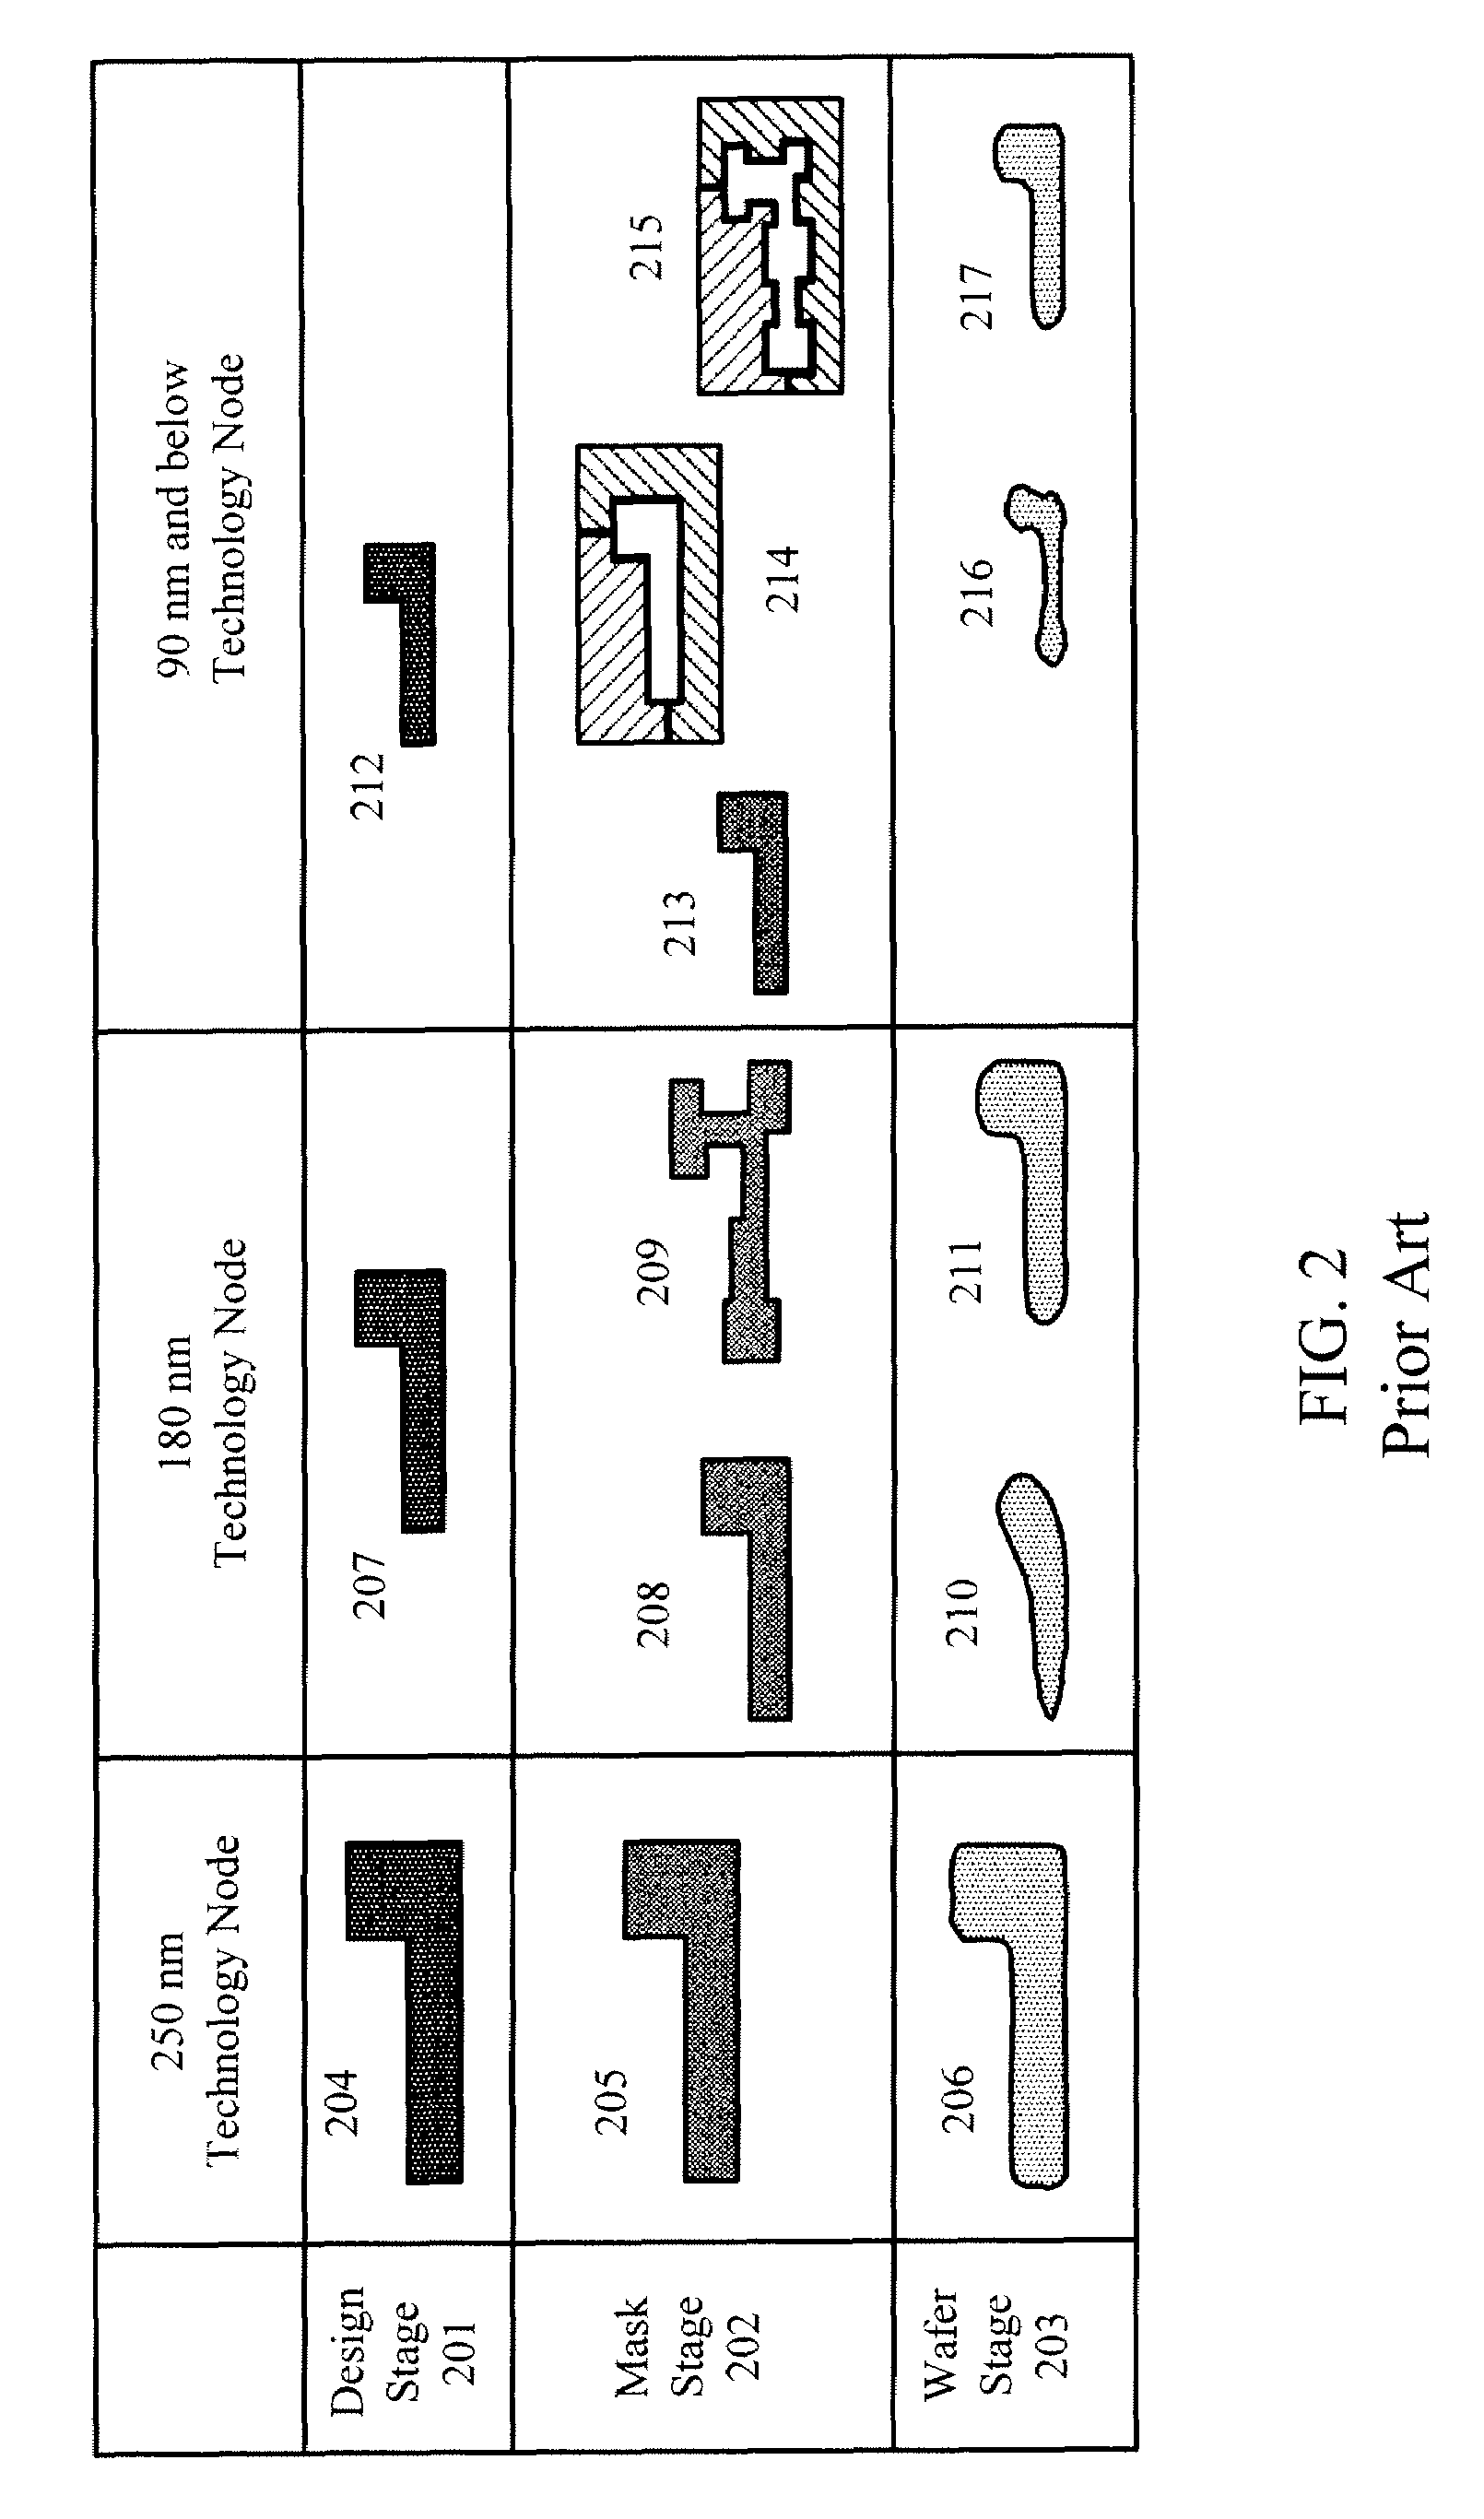 Patterning a single integrated circuit layer using multiple masks and multiple masking layers